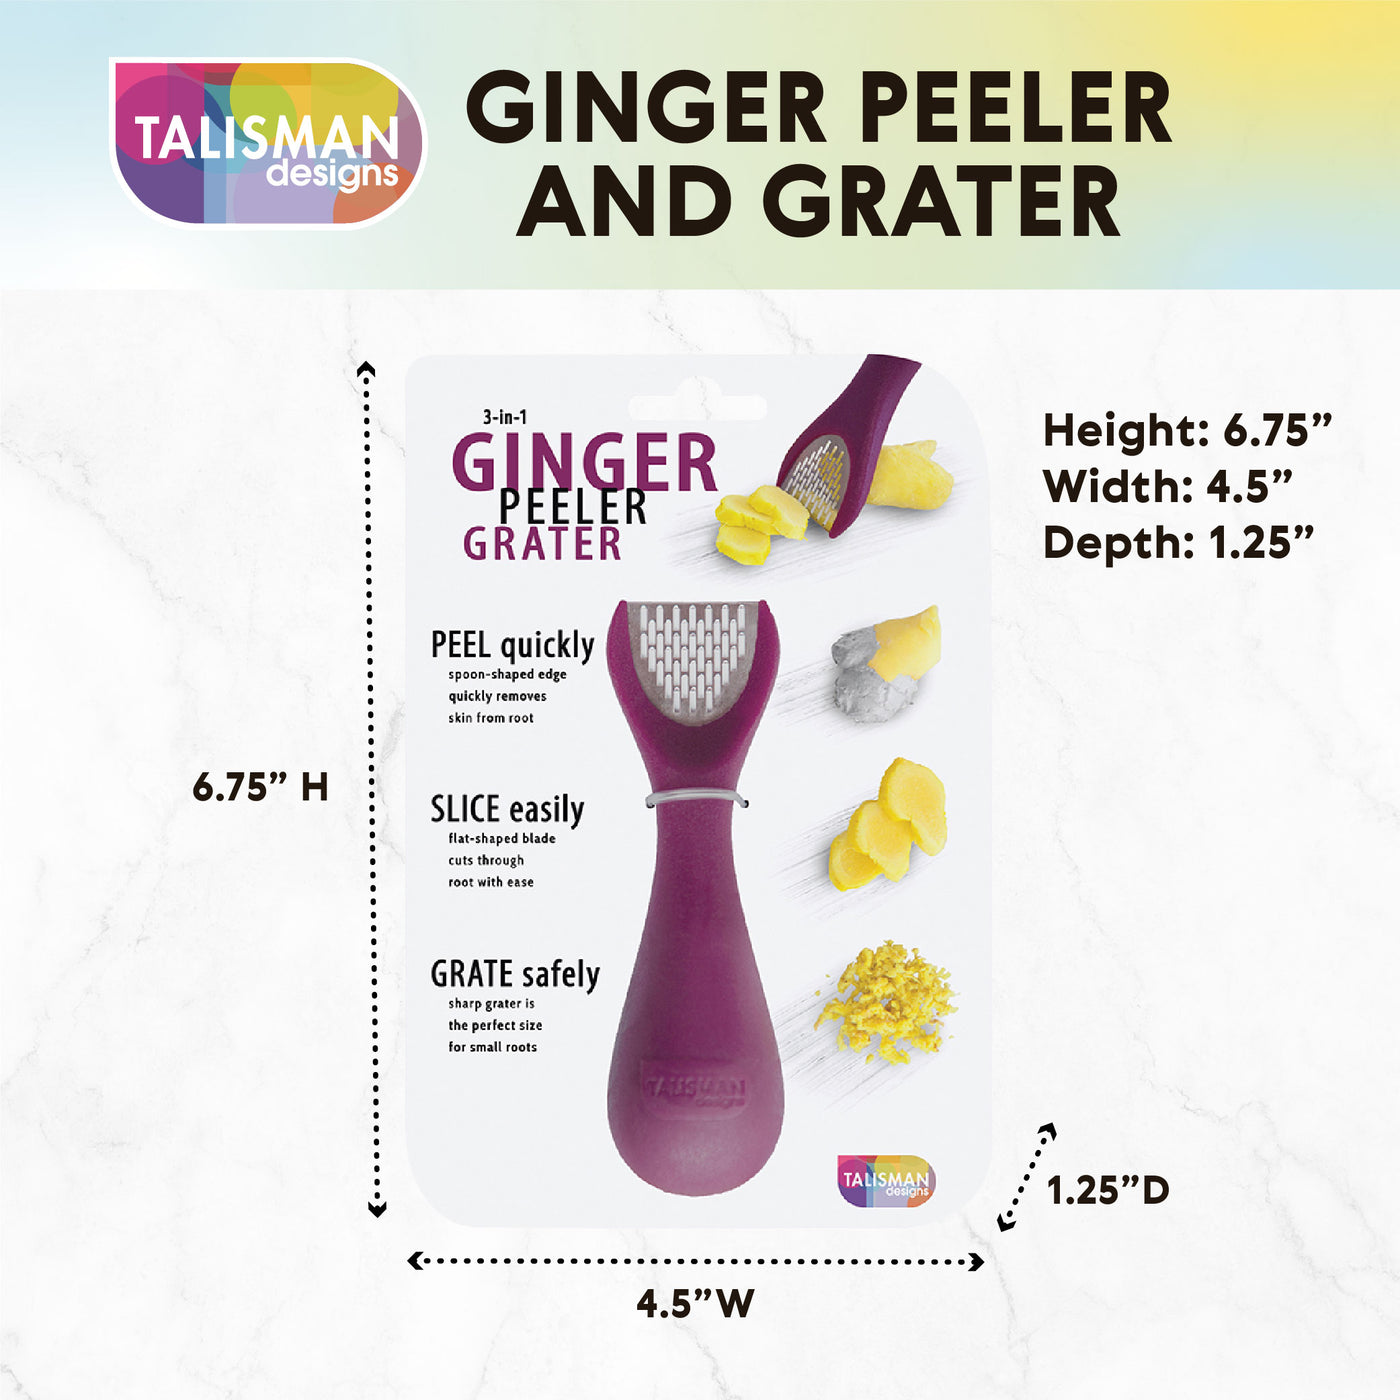 3-in-1 Ginger Peeler and Grater – Talisman Designs